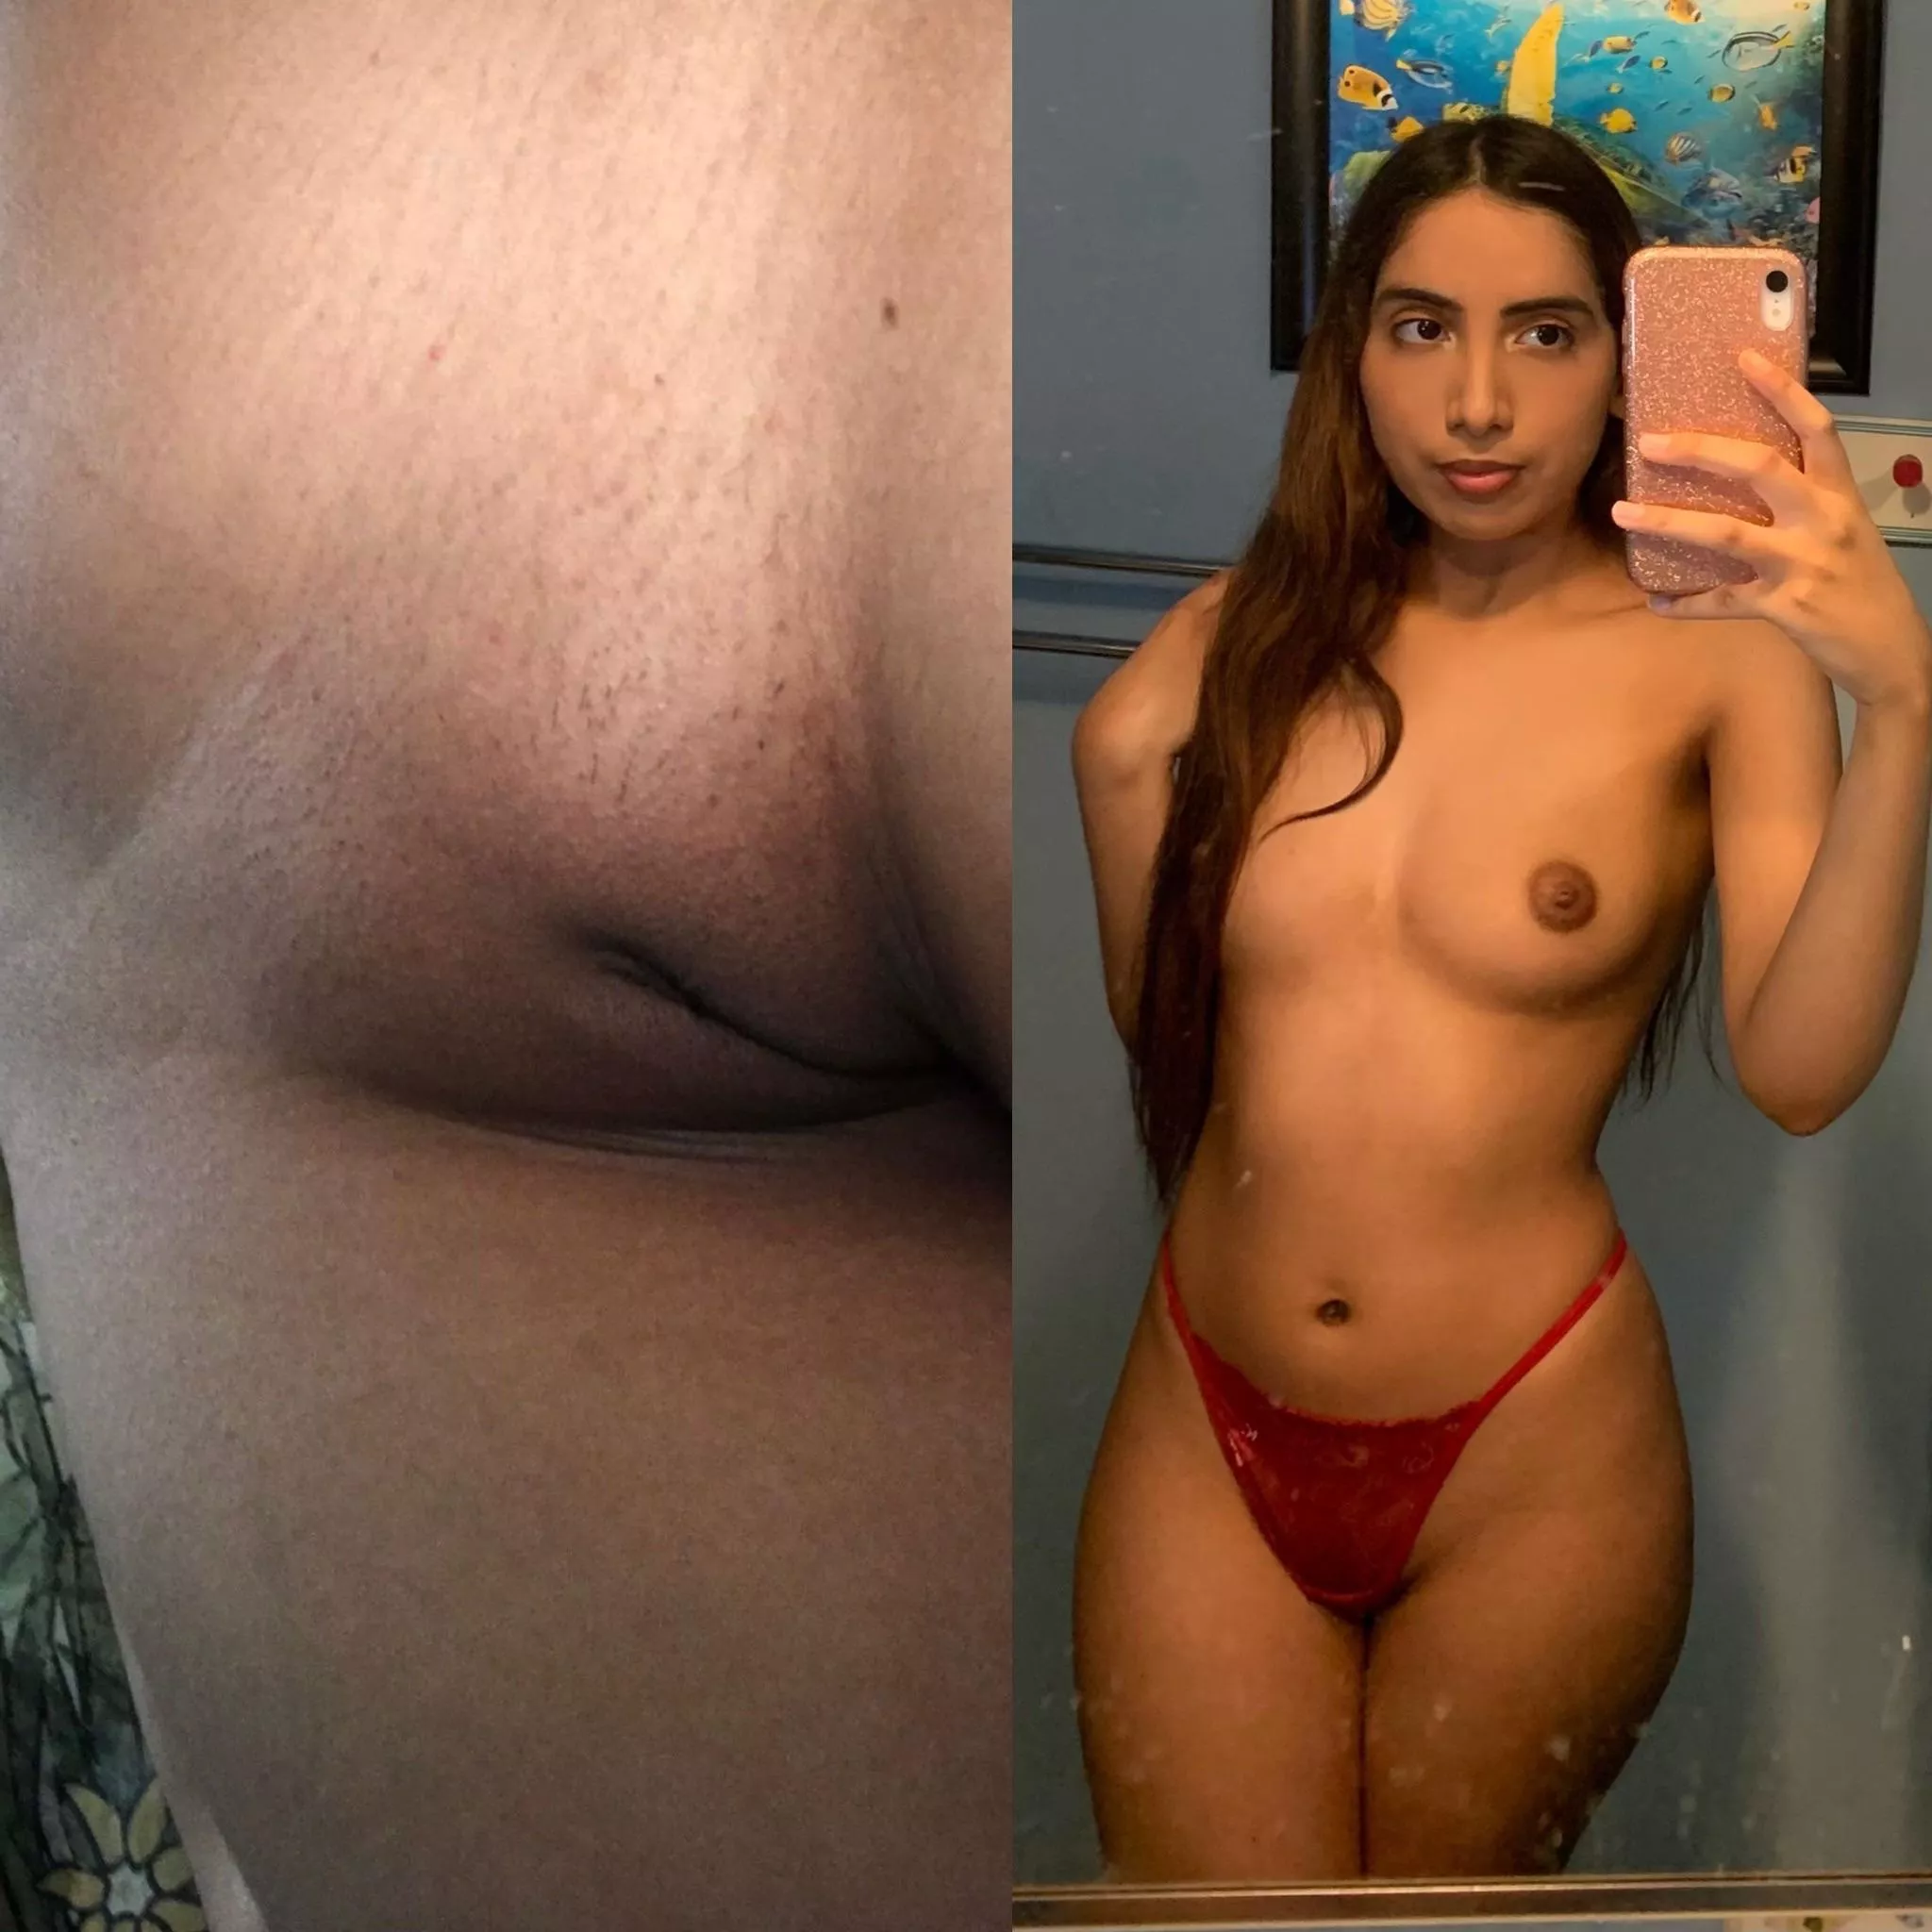 Mexican Pussy Girls - Can I interest you in some Mexican pussy? nudes : gonewildcolor | NUDE-PICS .ORG